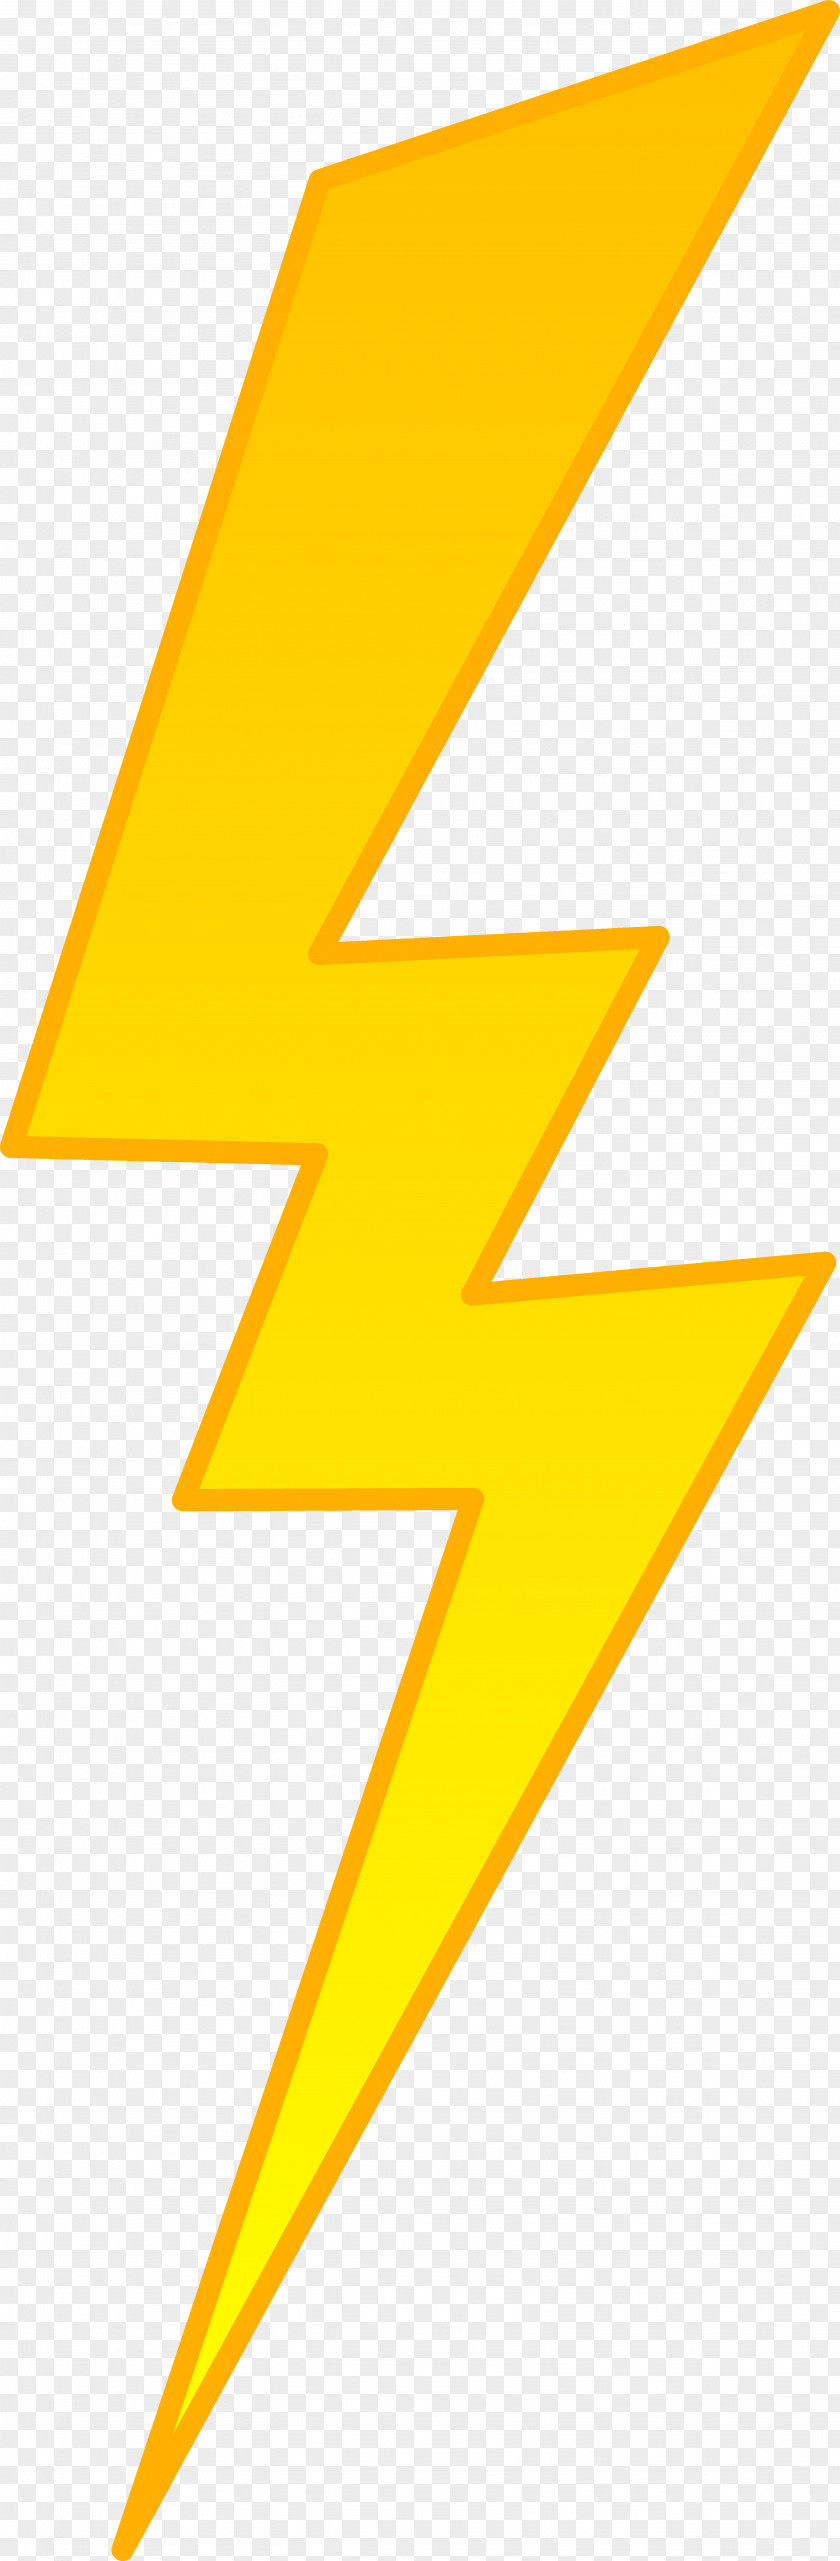 Lightning Drawing Electricity Clip Art PNG